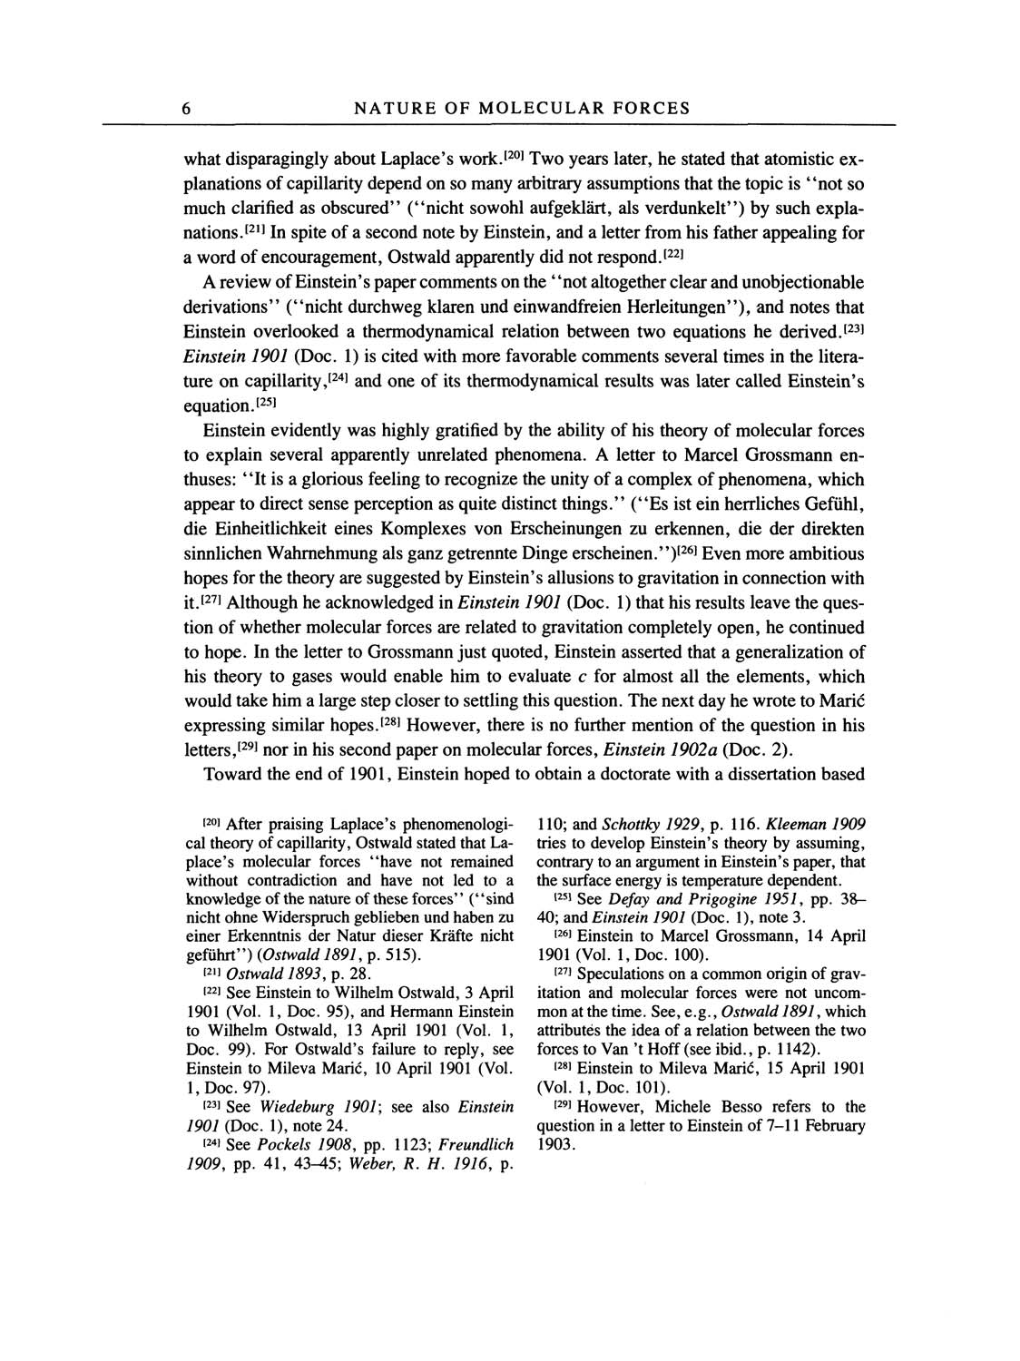 Volume 2: The Swiss Years: Writings, 1900-1909 page 6